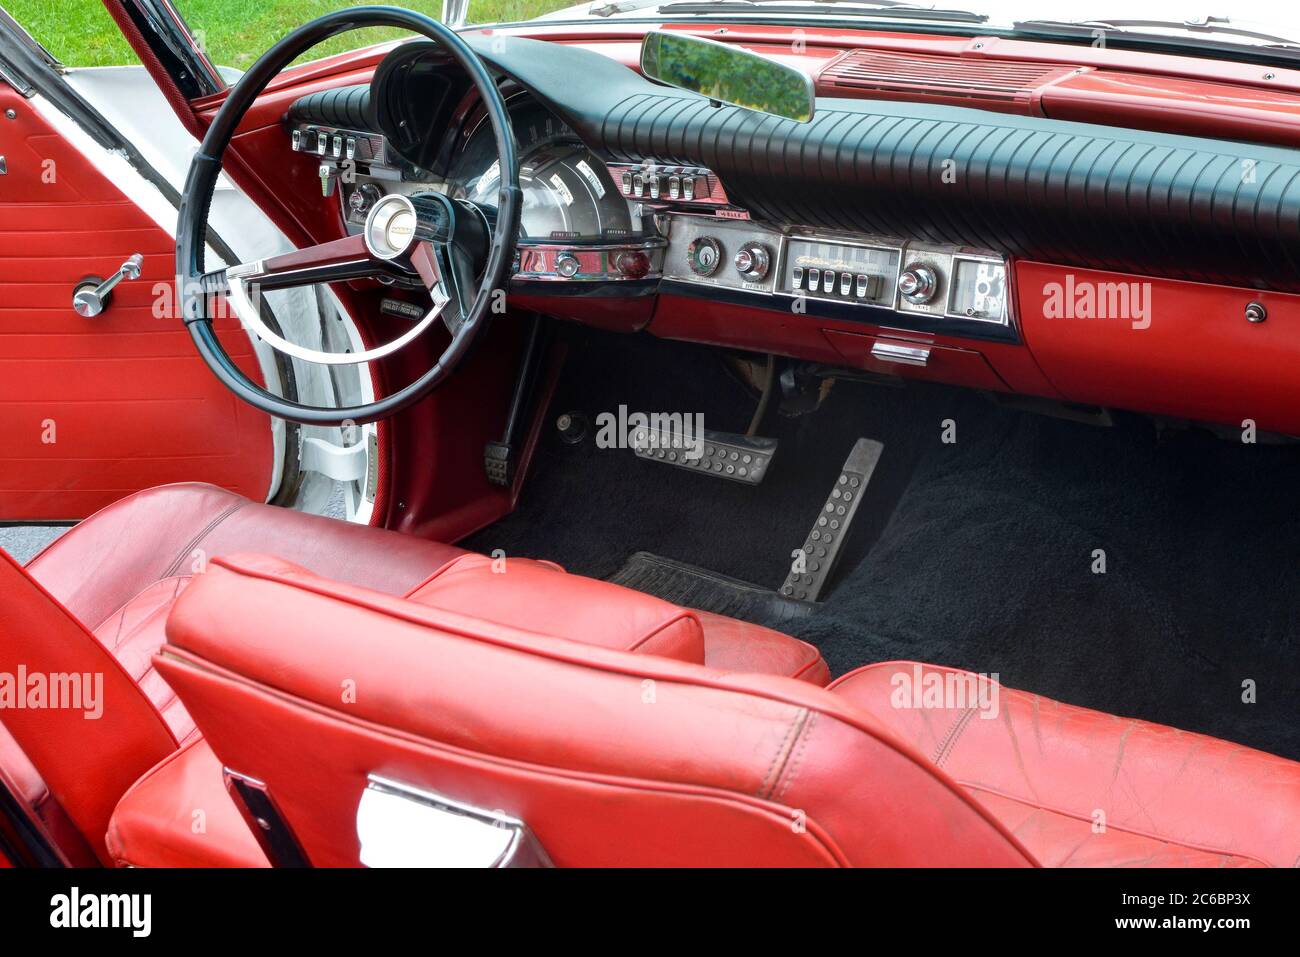 1962 Chrysler Newport convertible red interior and dashboard Stock Photo